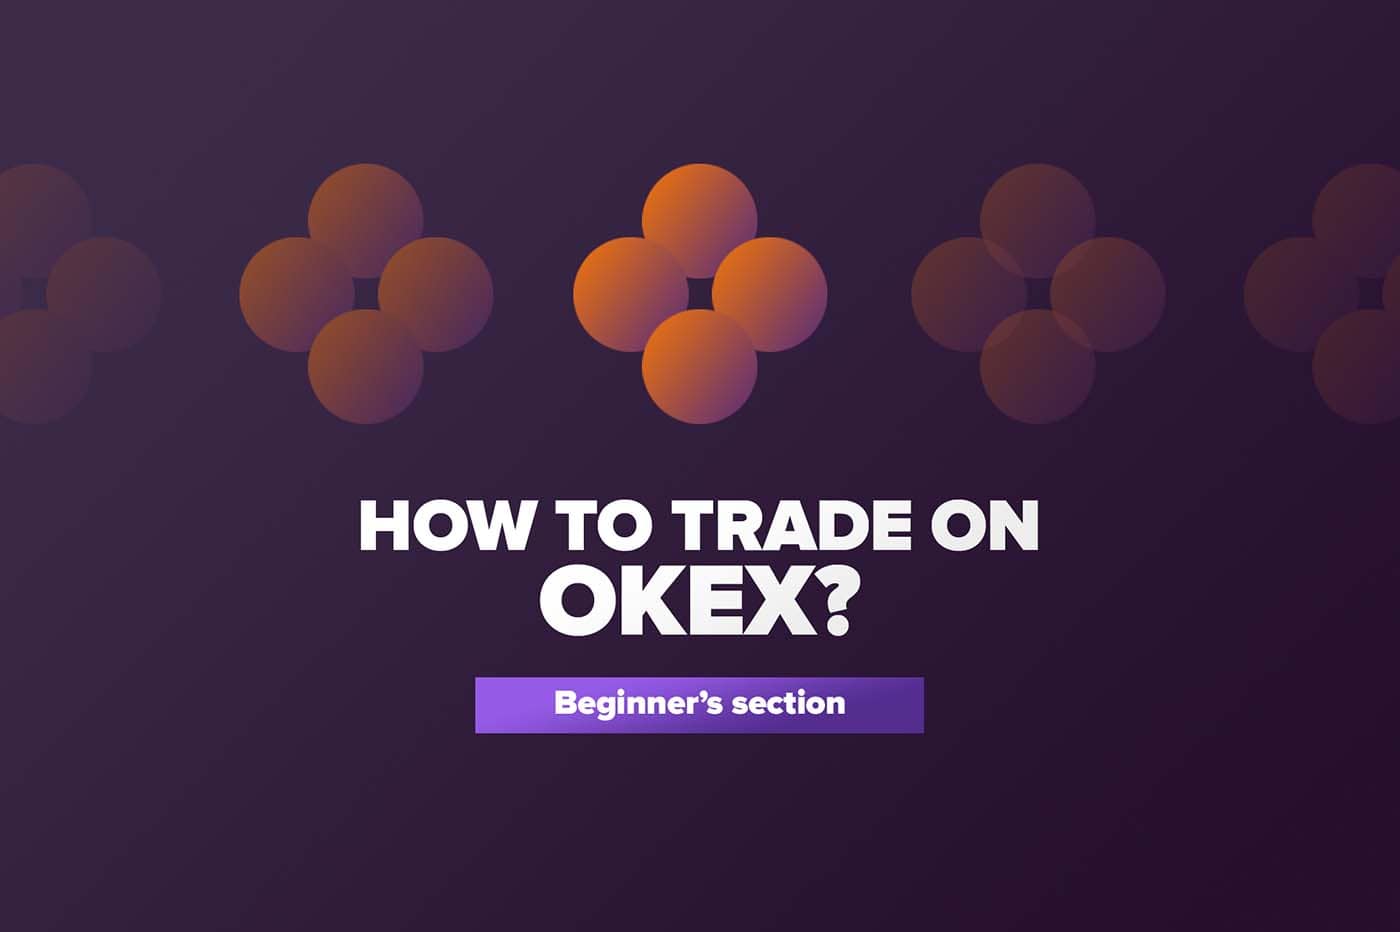 How to trade on OKEX?